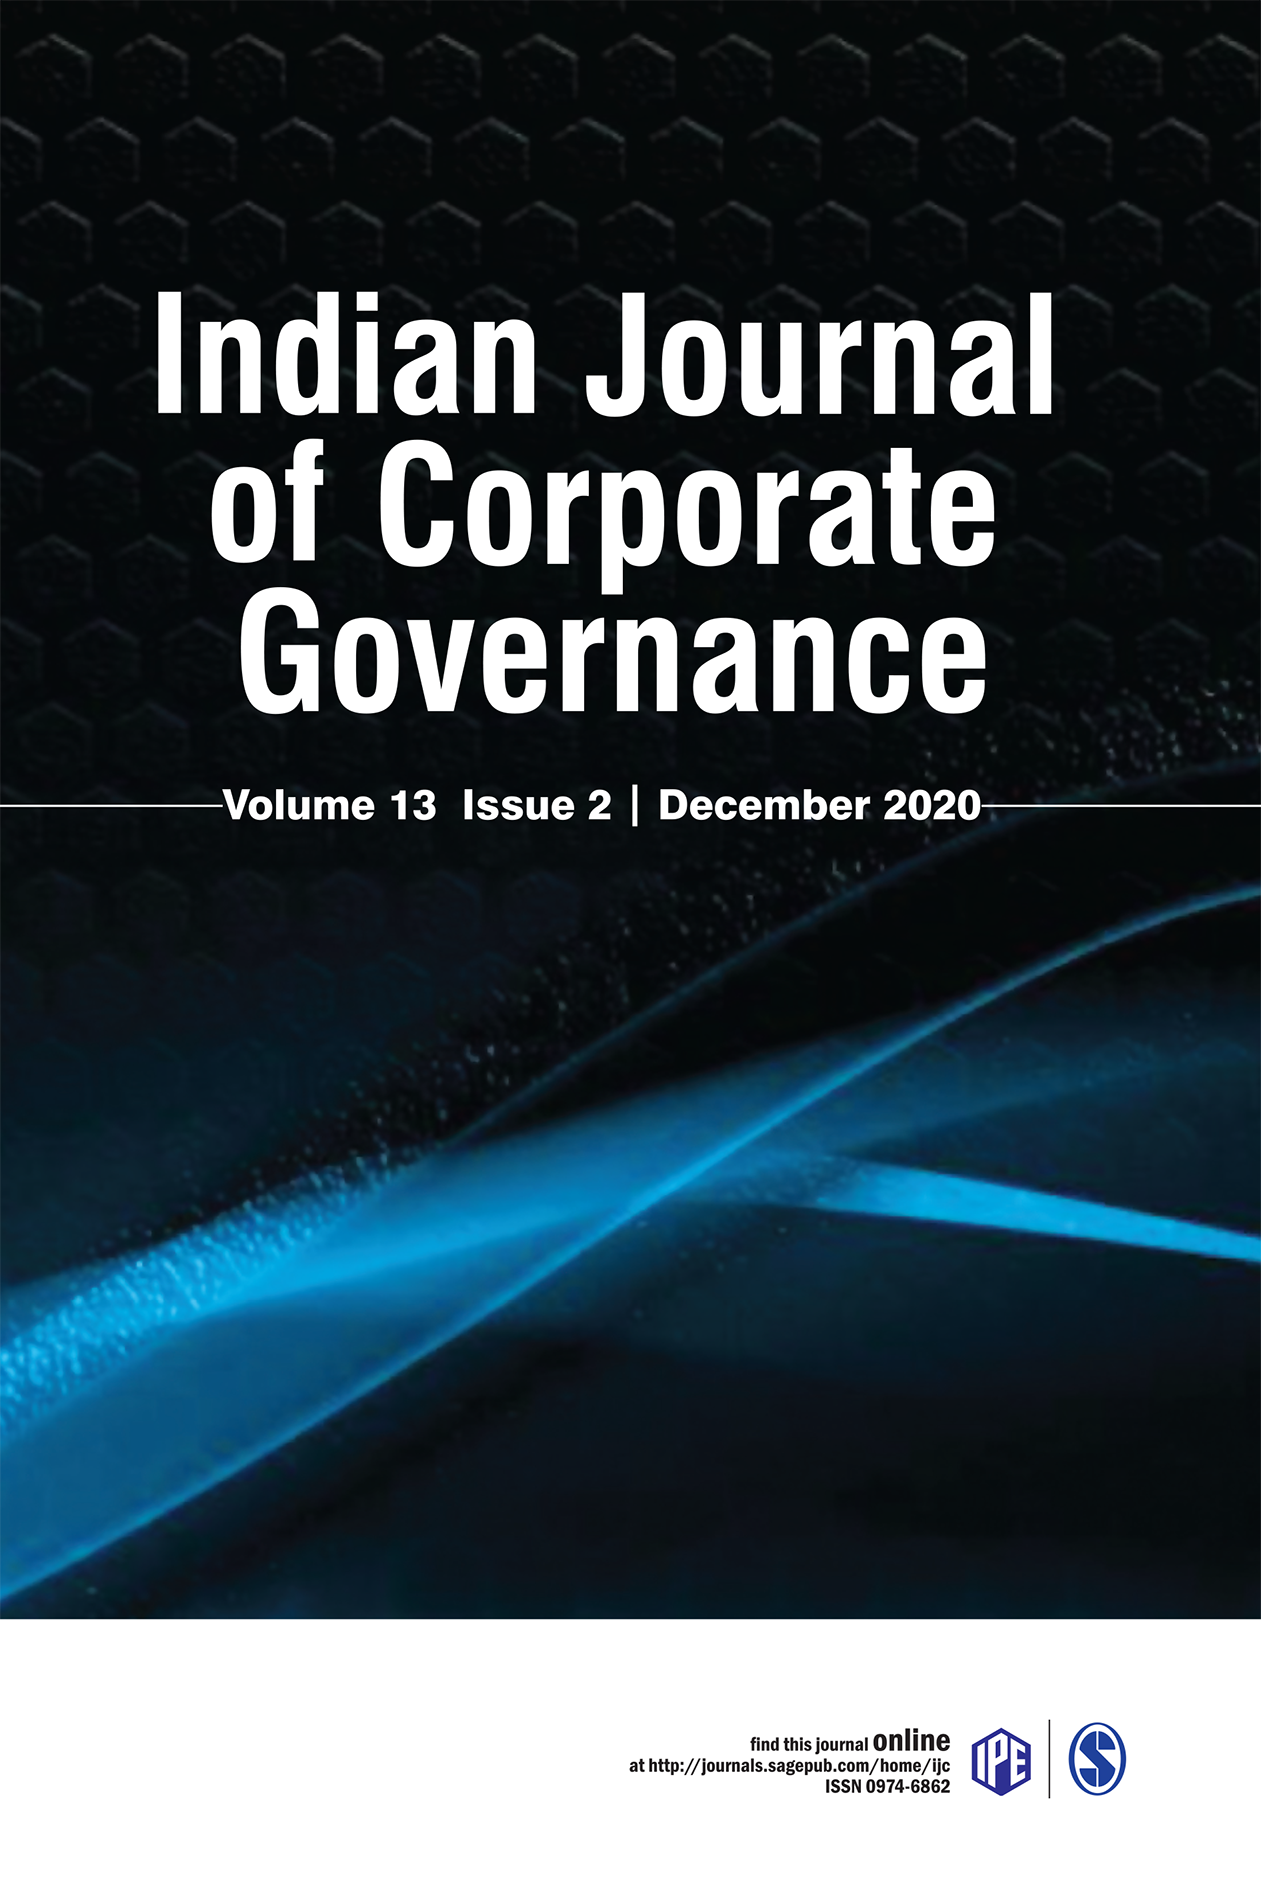 Indian Journal of Corporate Governance